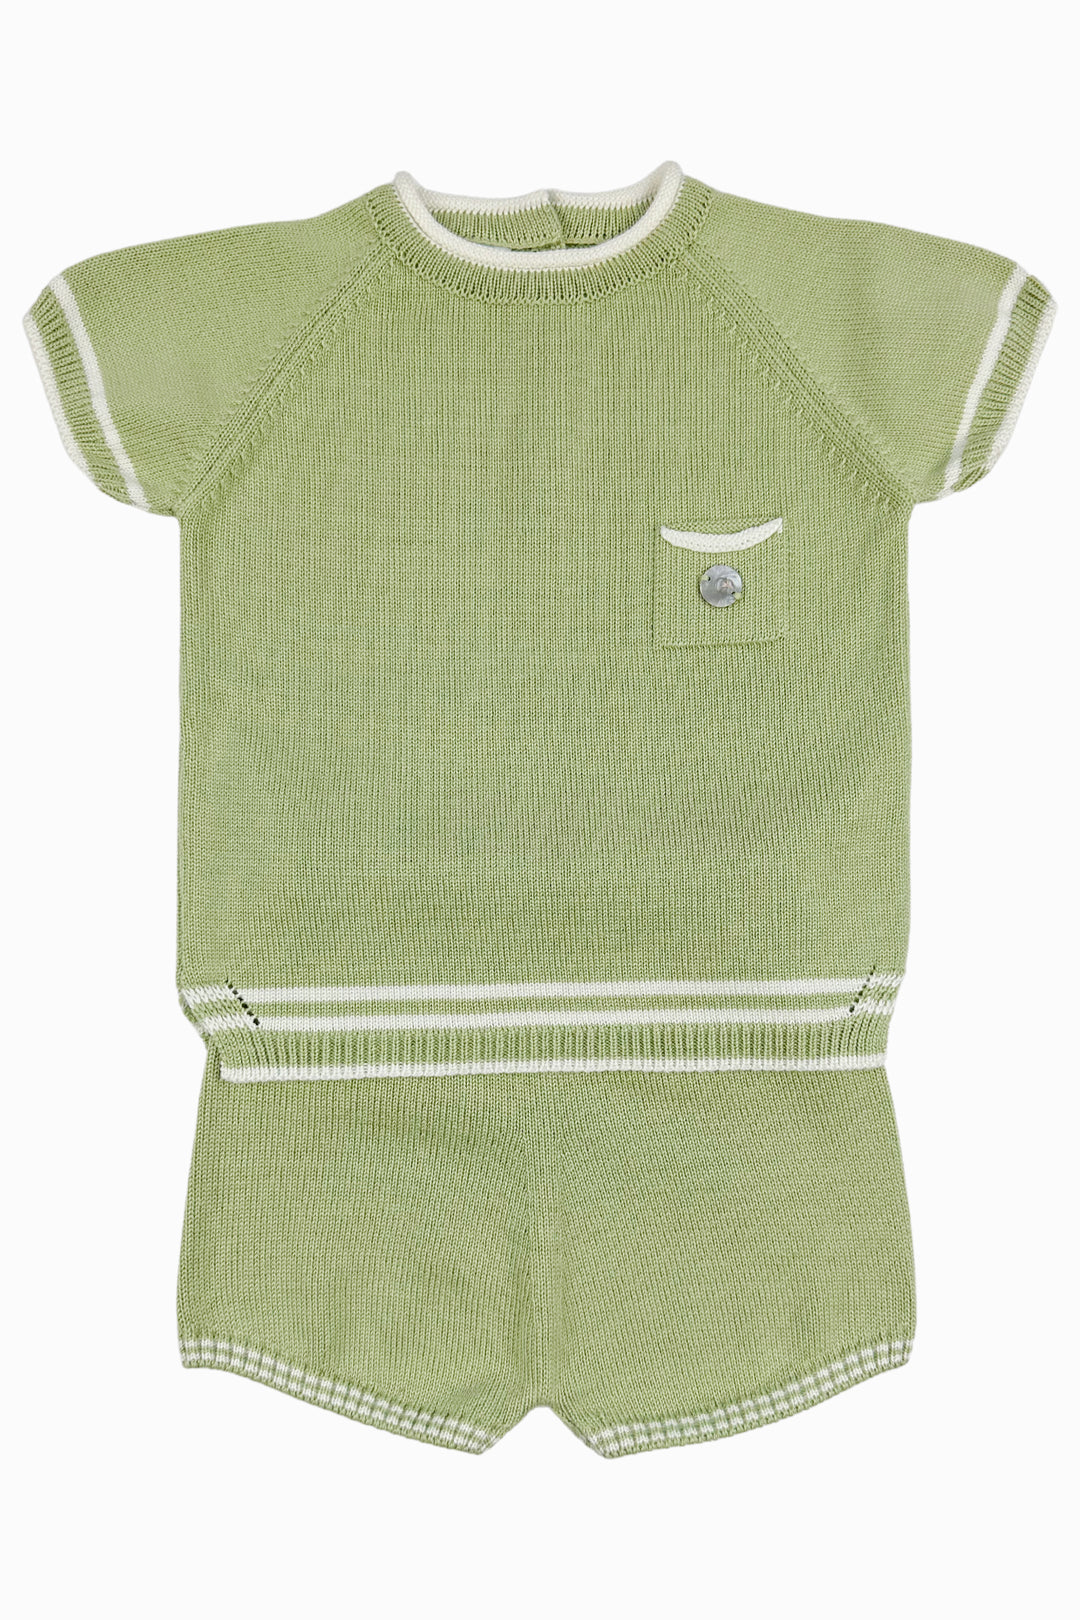 Granlei "Kylo" Olive Green Knit Top & Shorts | Millie and John